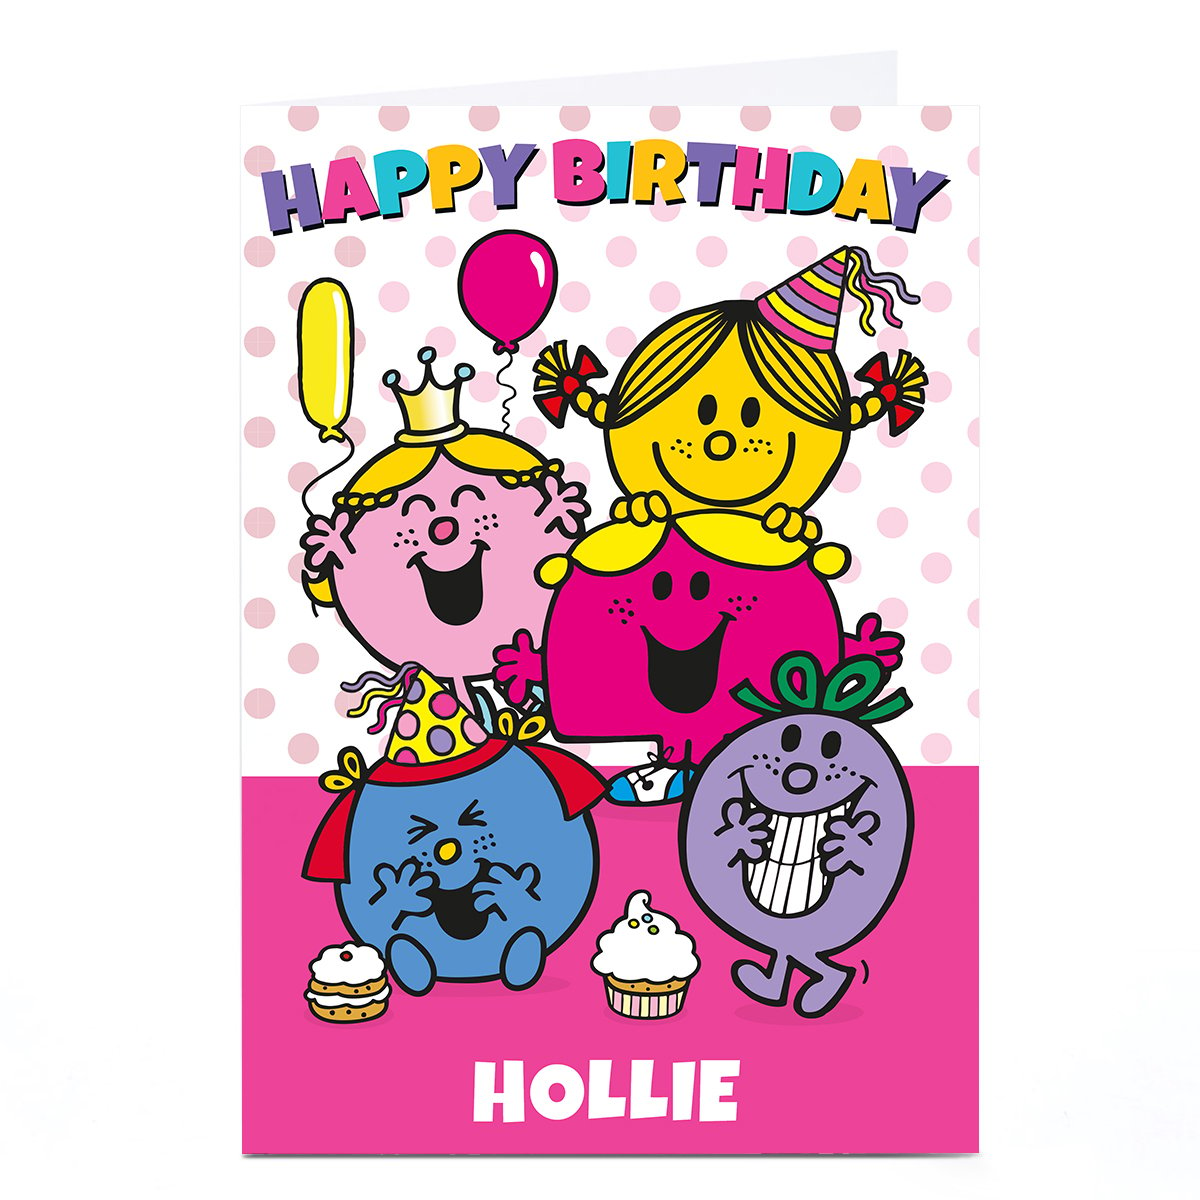 Personalised Card - Mr Men Birthday Party